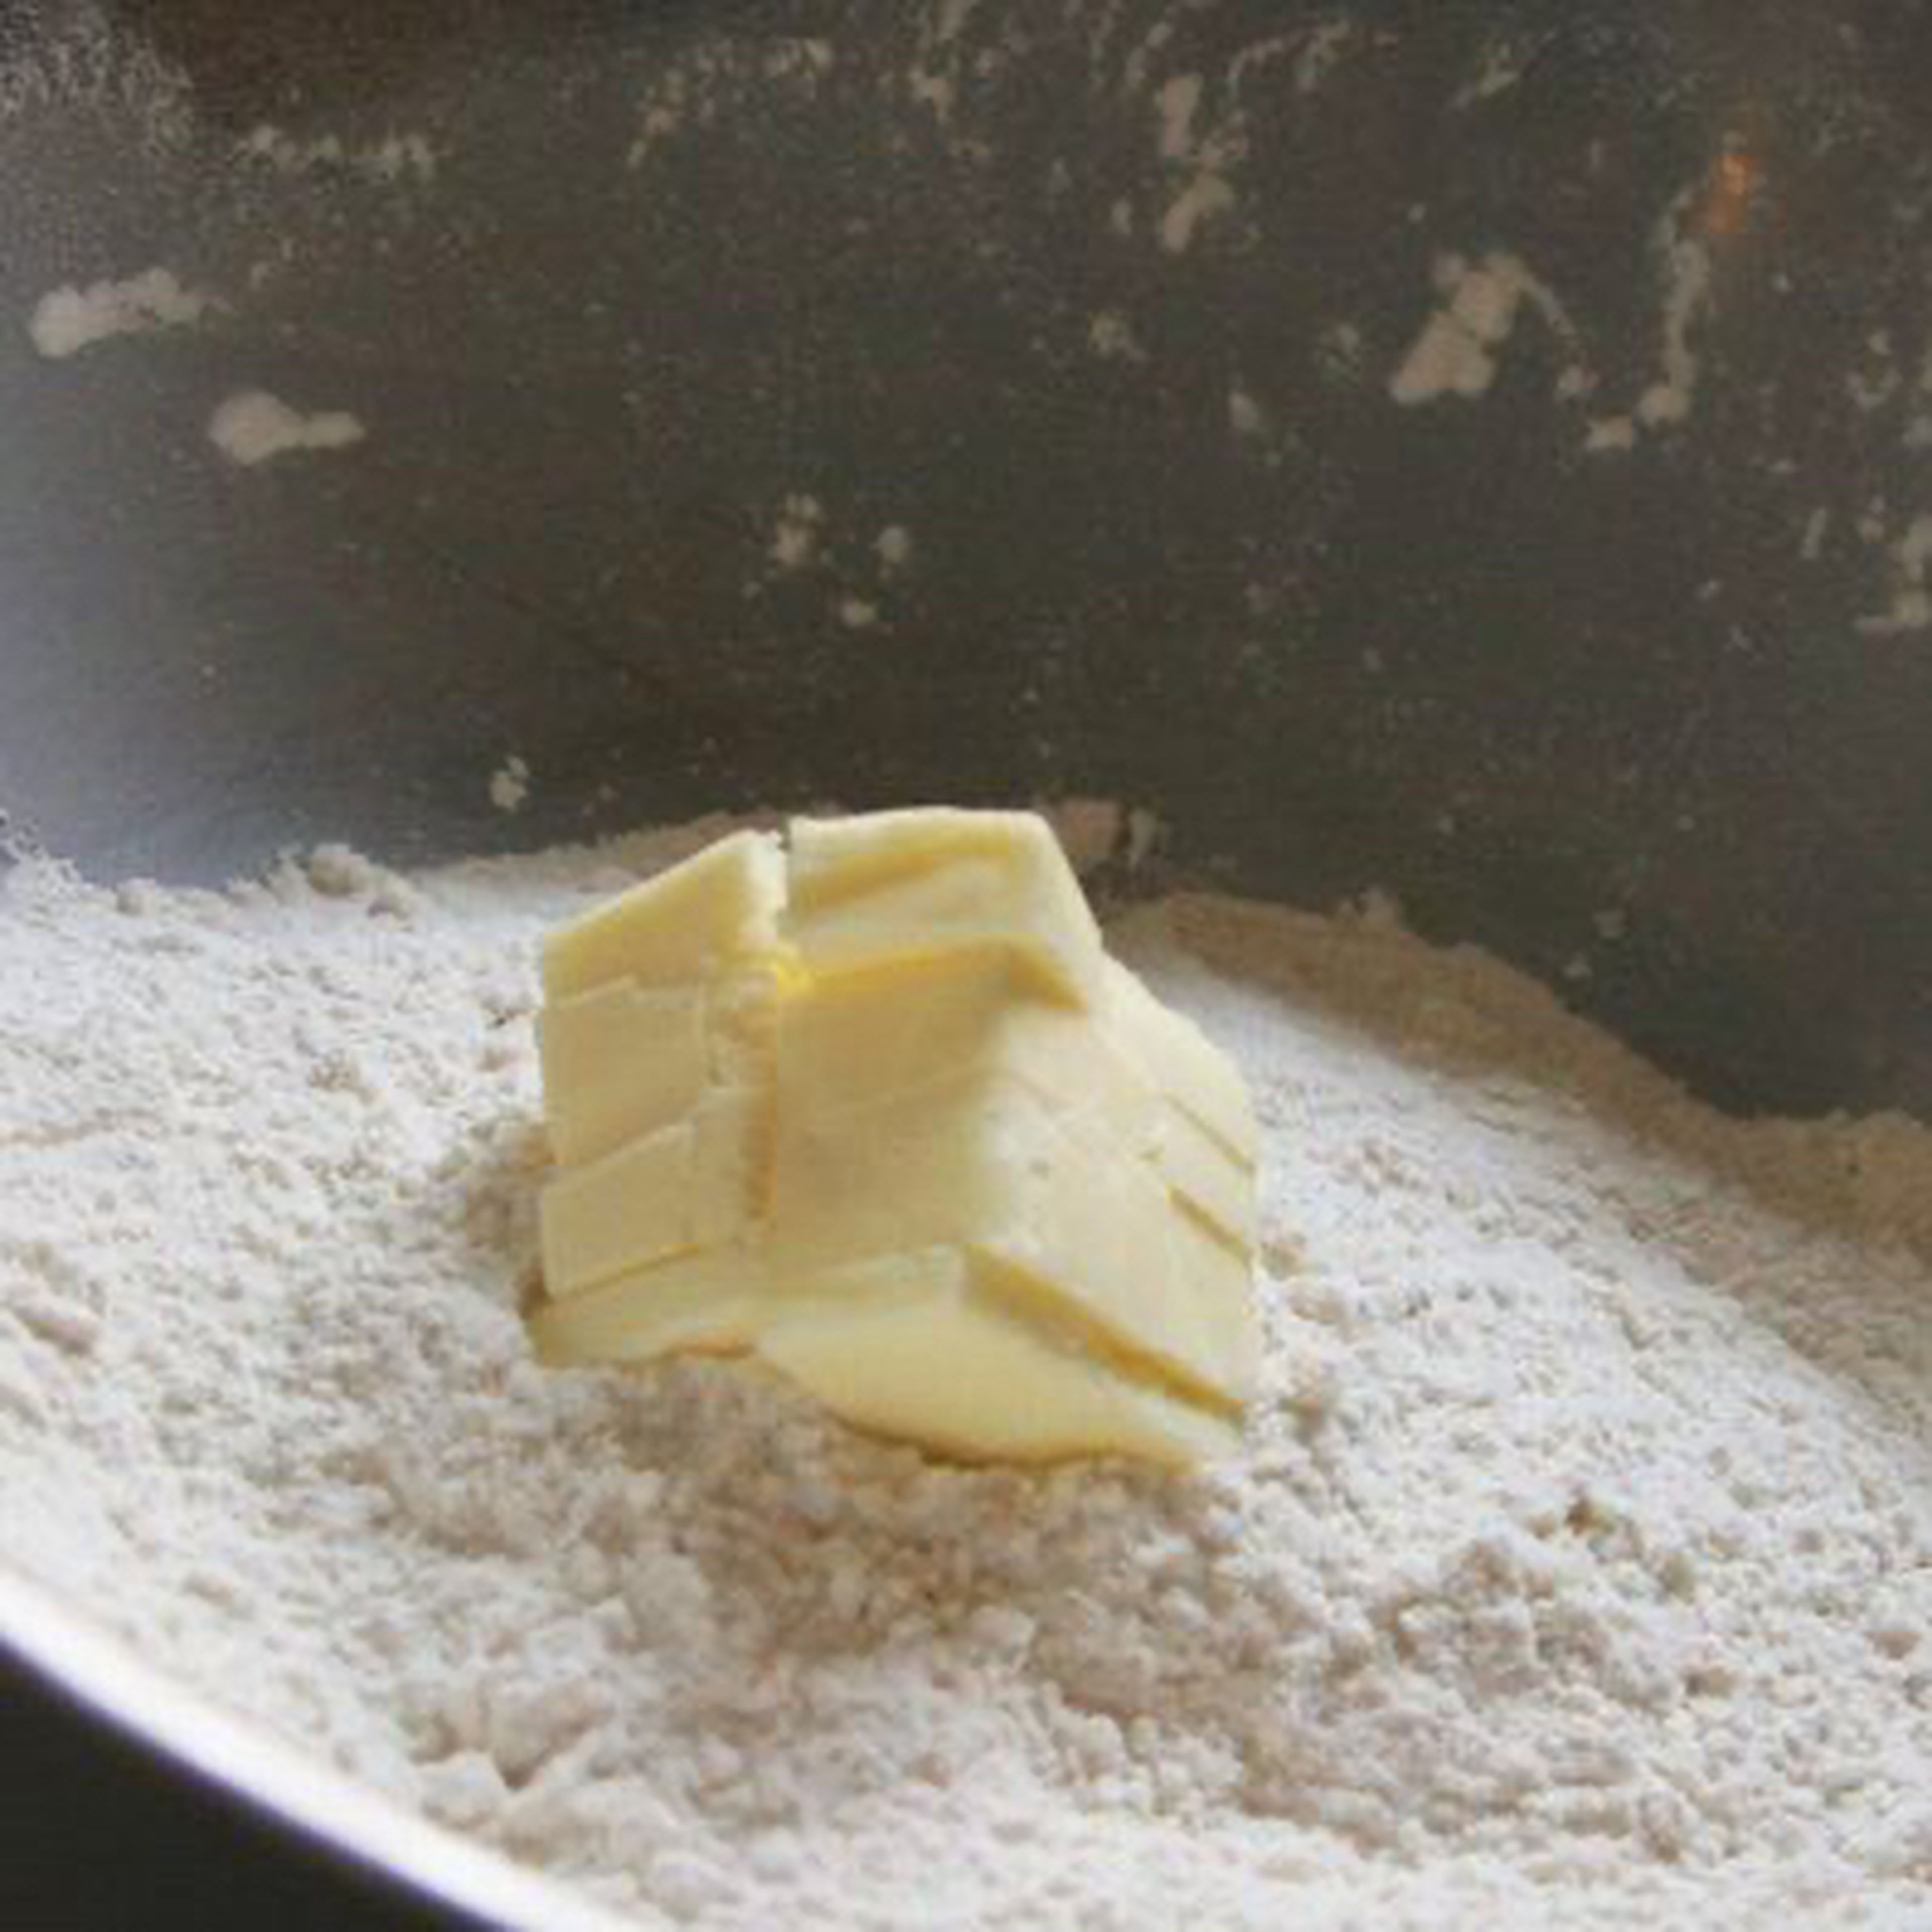 Add flour to melted butter and mix